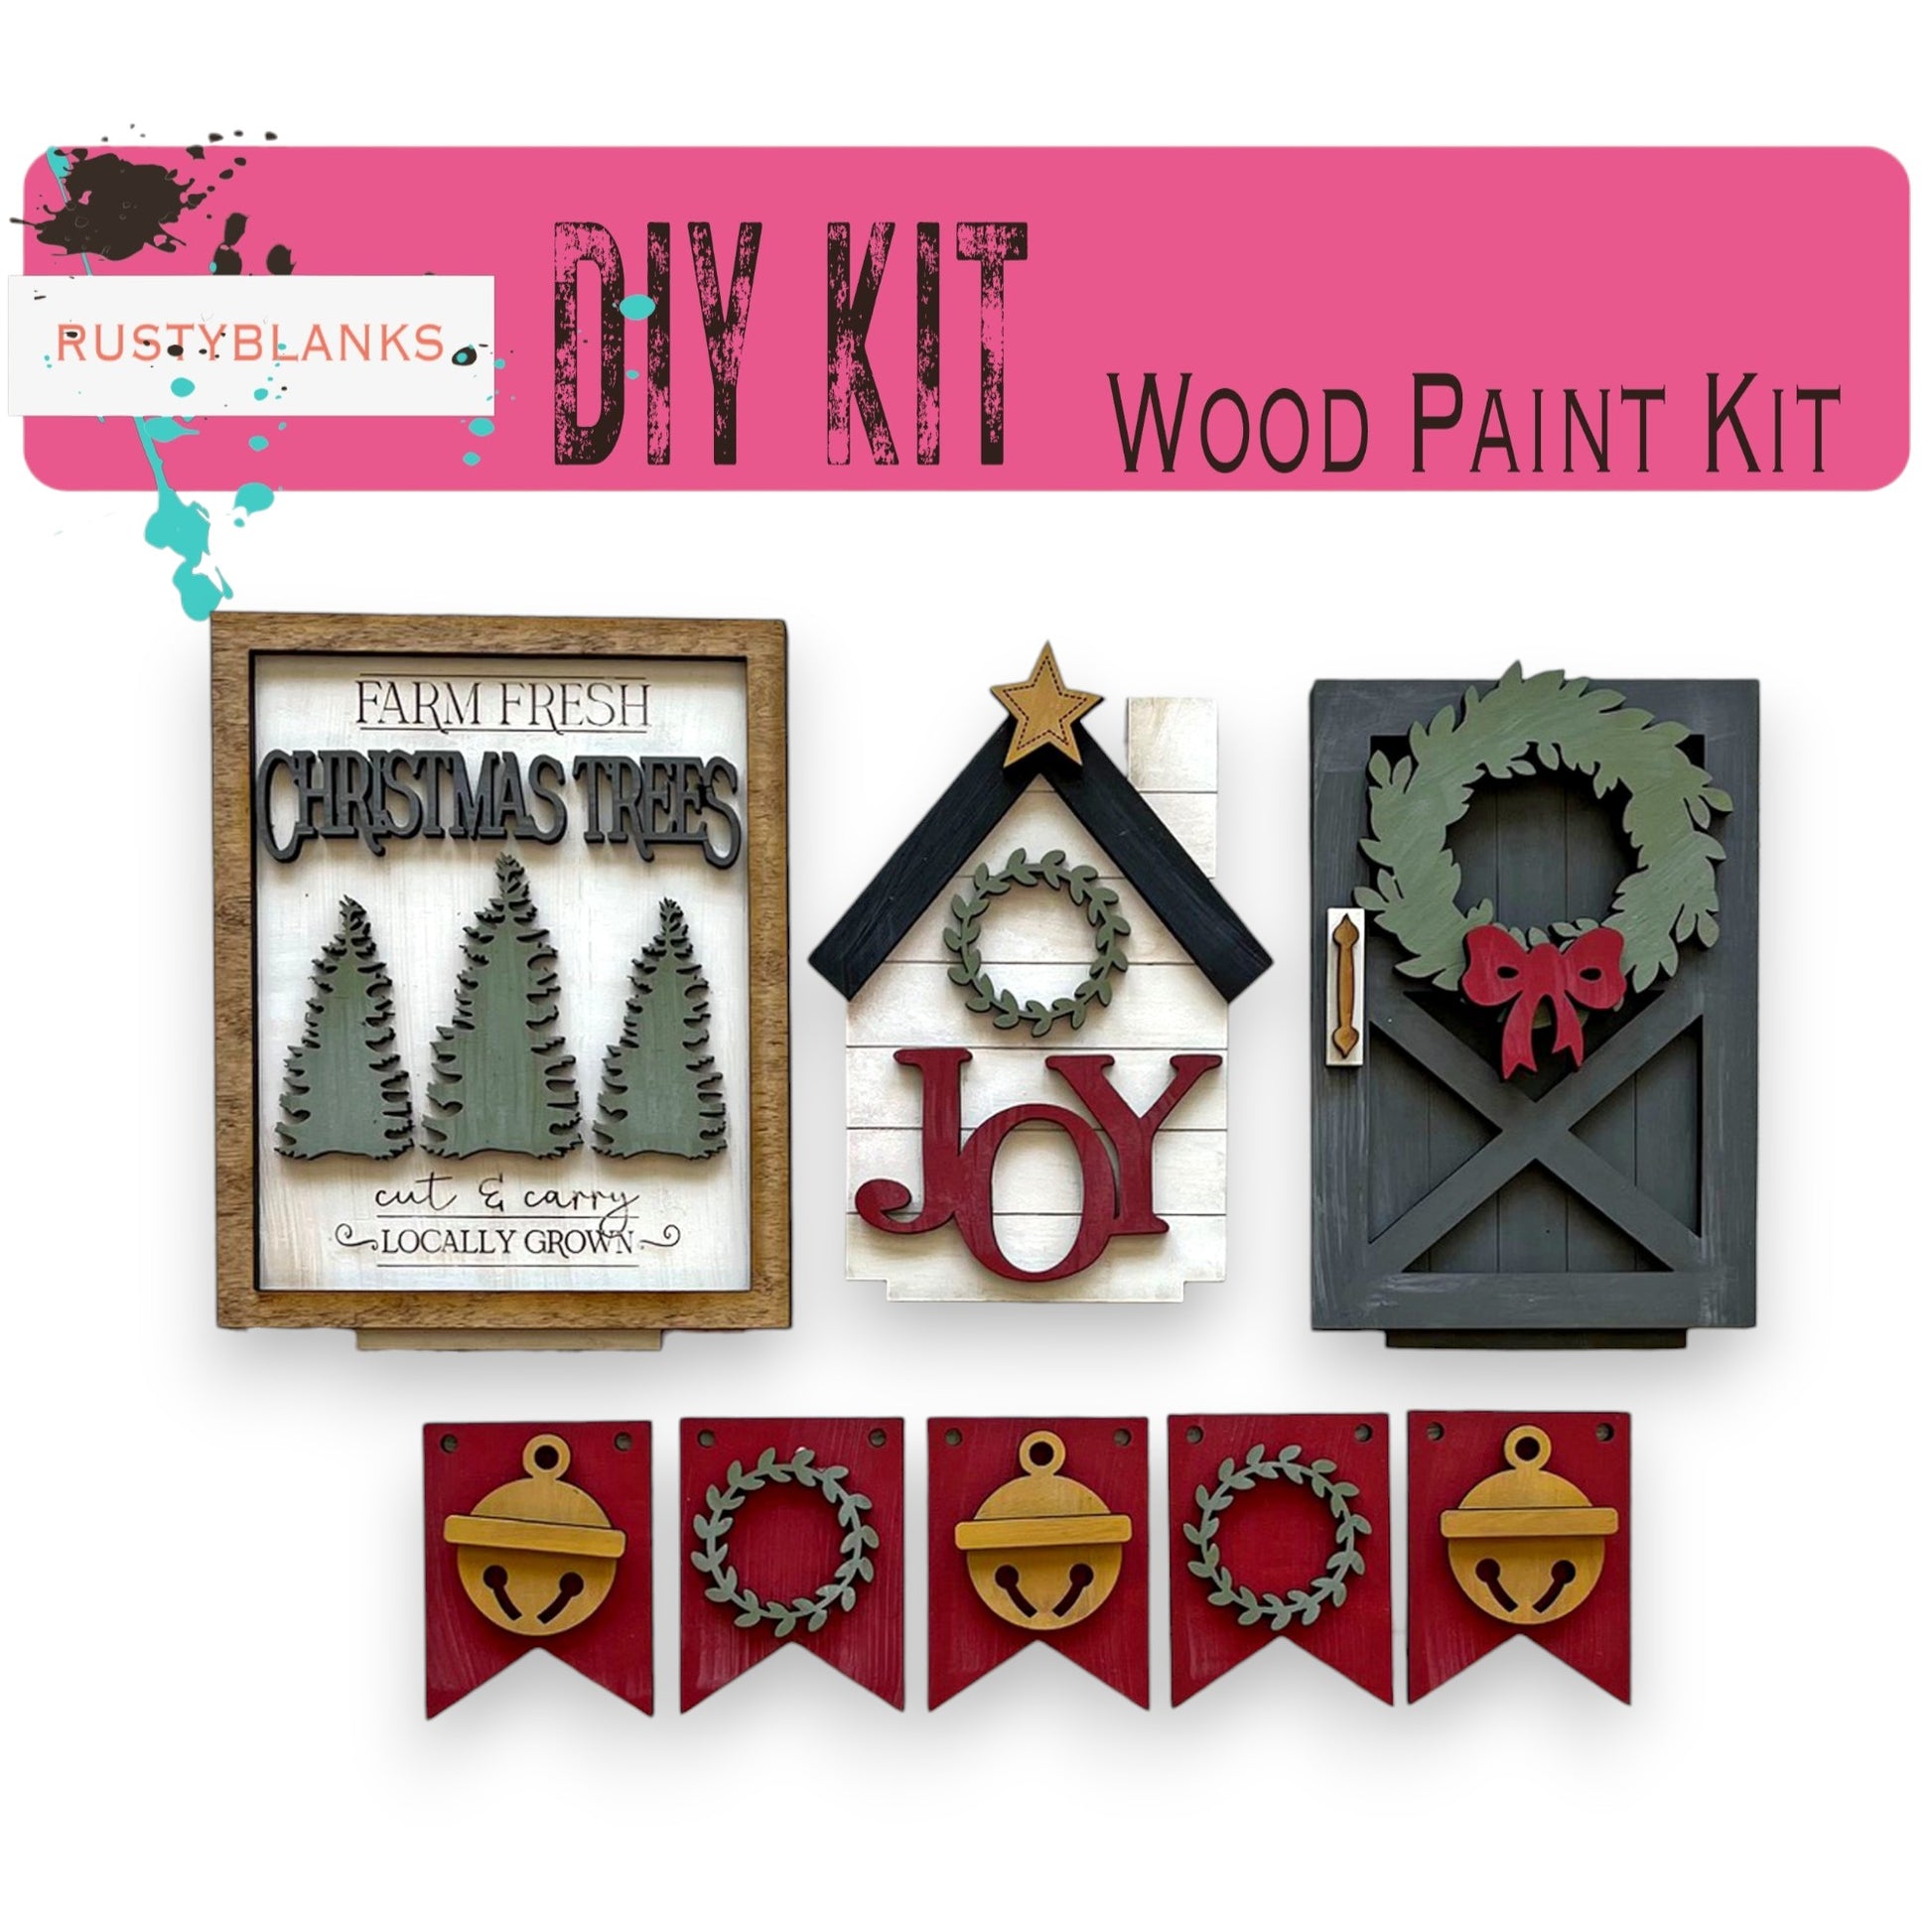 a picture of a wood paint kit for christmas